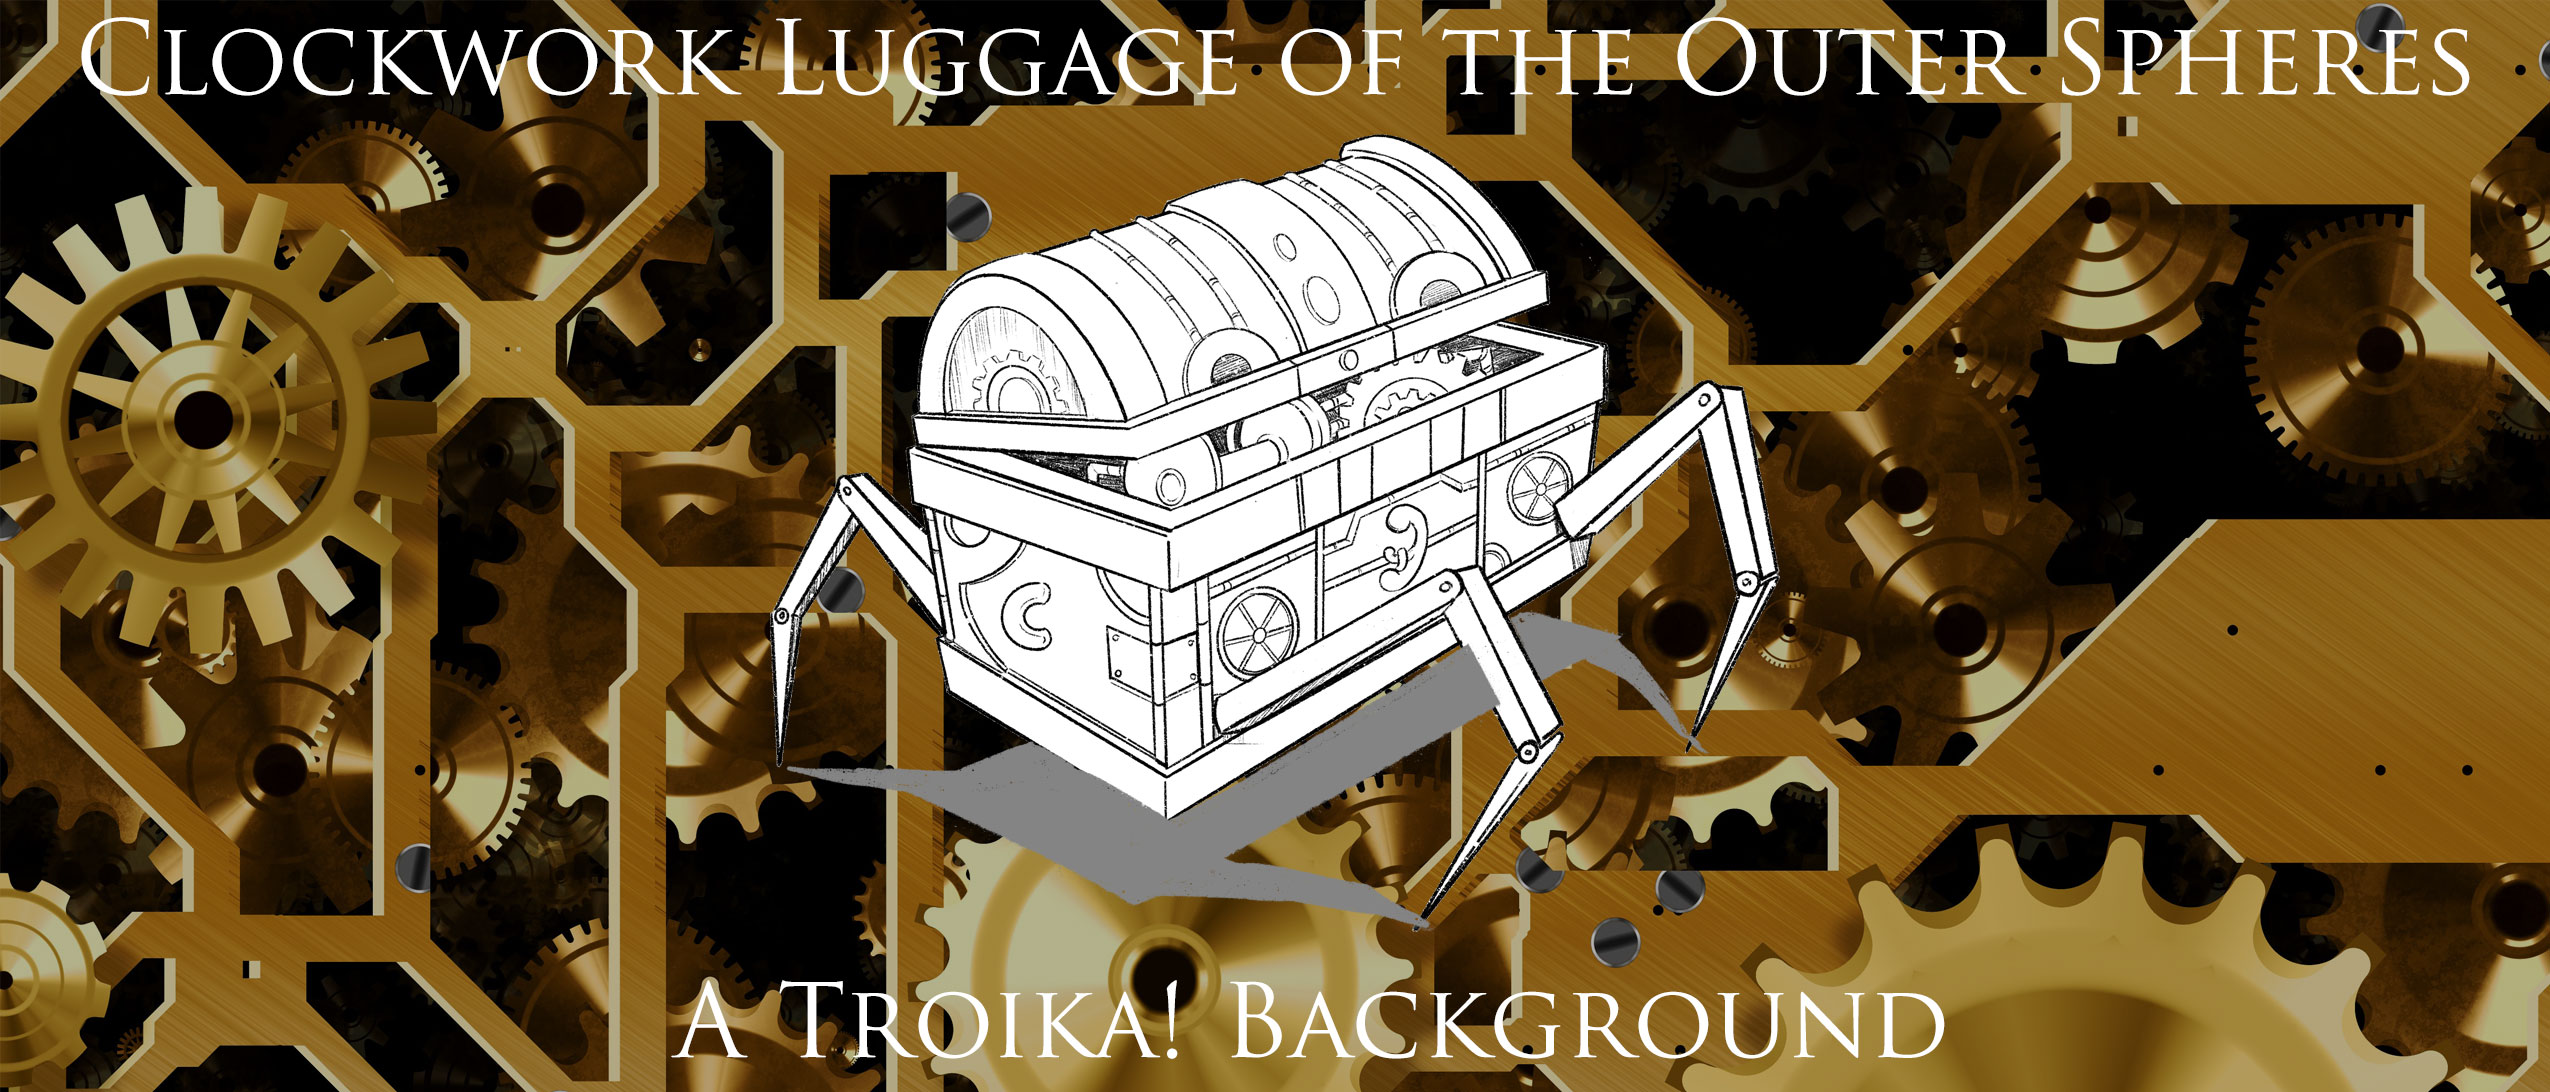 Clockwork Luggage of the Outer Spheres - A Troika! Background